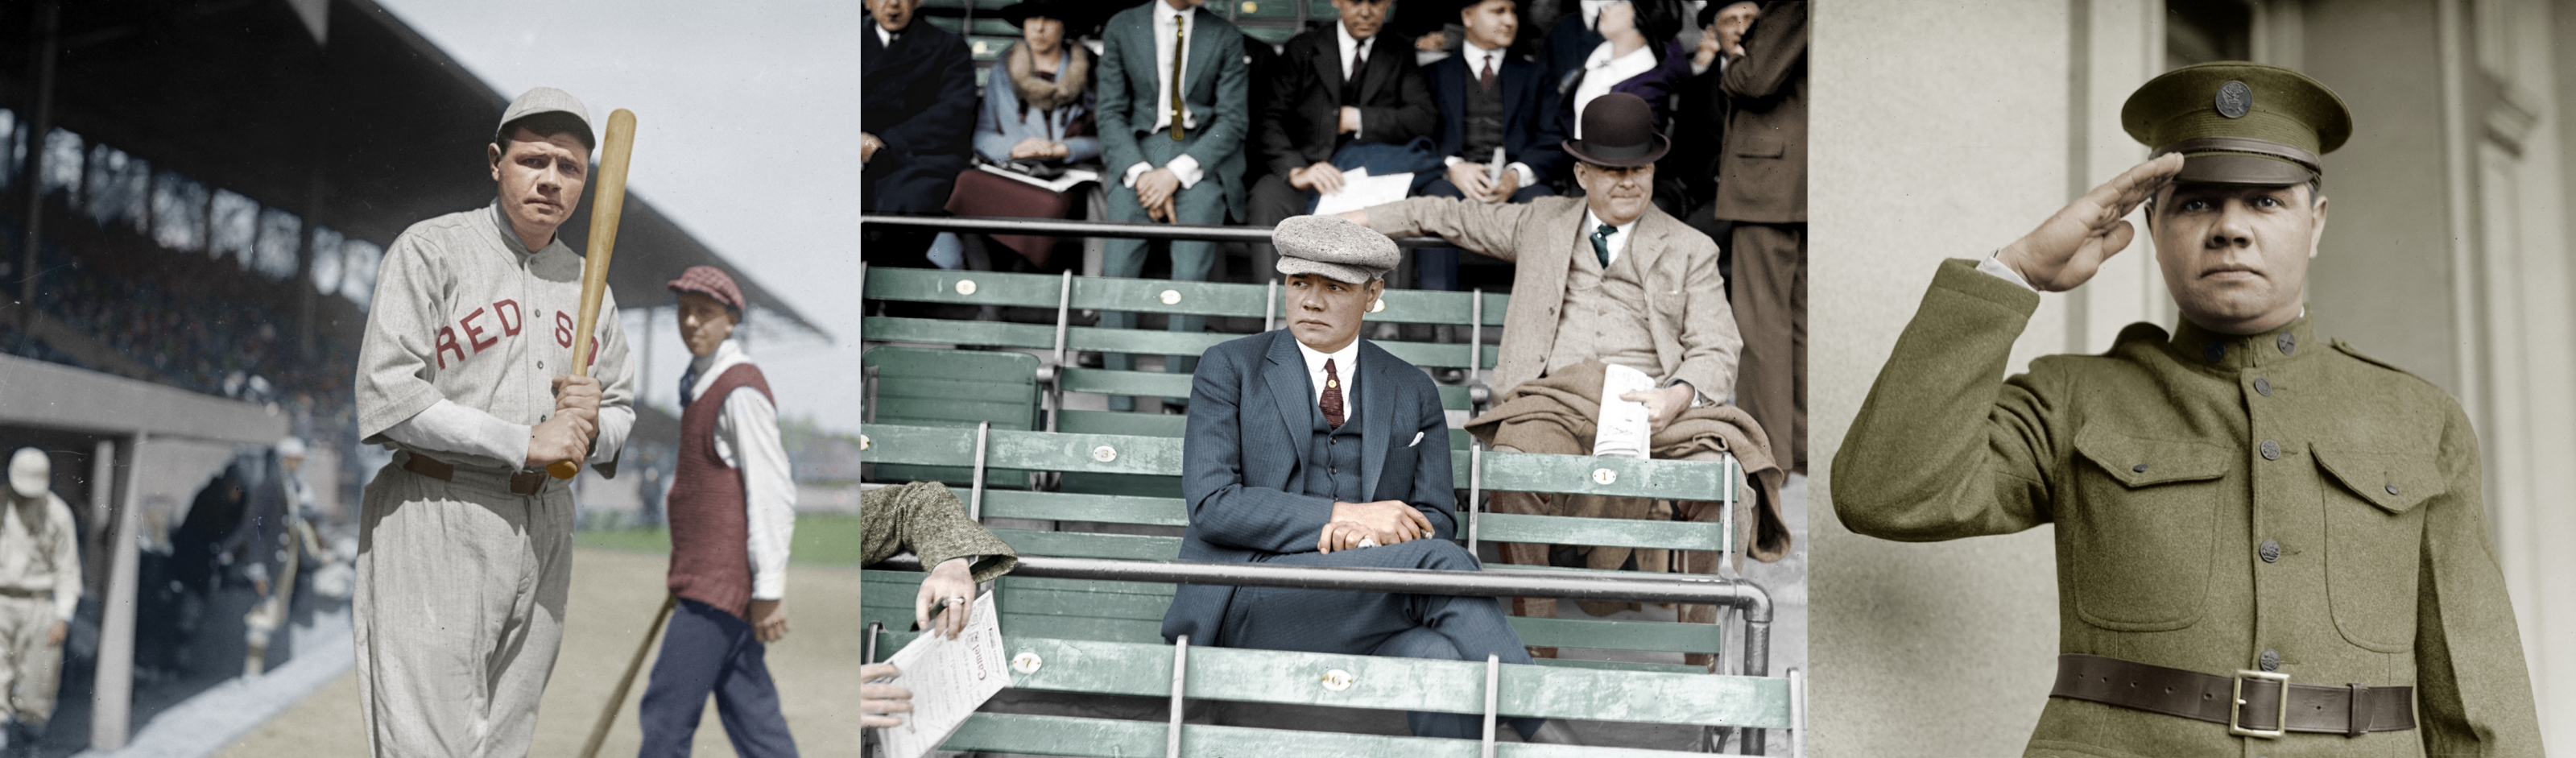 Babe Ruth - Dressed For The Occasion. Library of Congress Photos  1919 - 1924. View full size.
